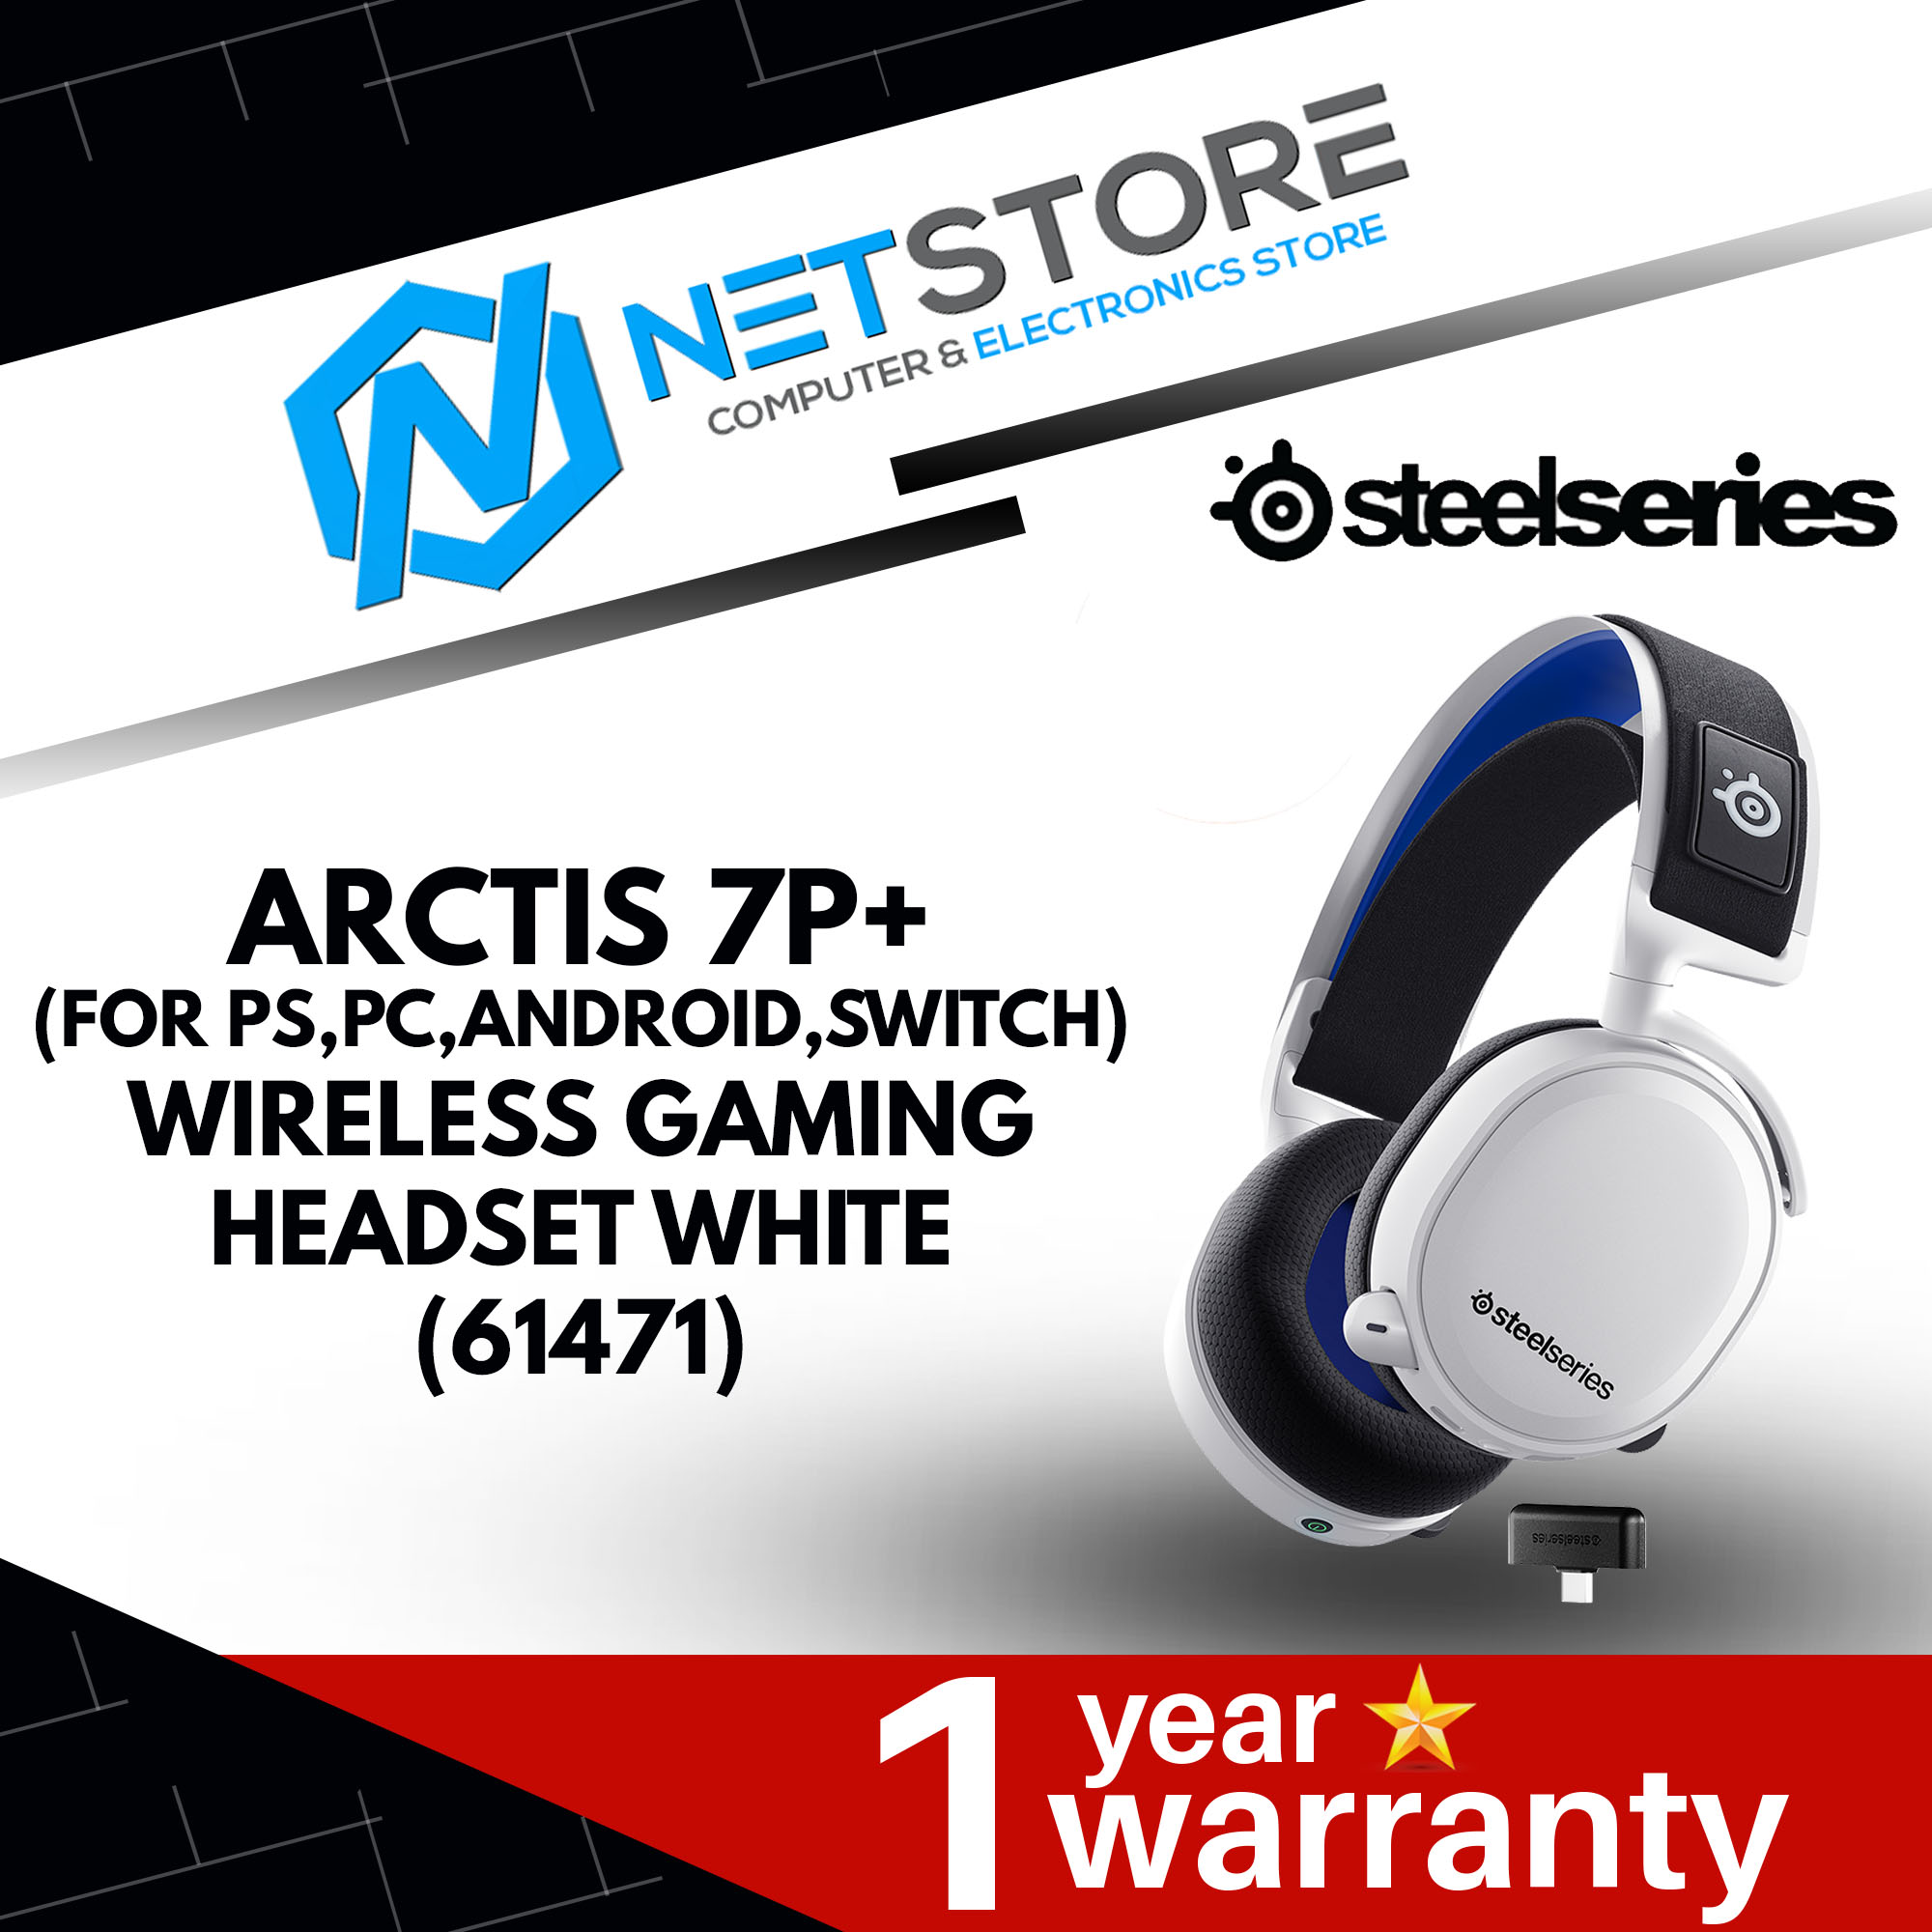 STEELSERIES ARCTIS 7P+ (FOR PS,PC,ANDROID,SWITCH) WIRELESS GAMING